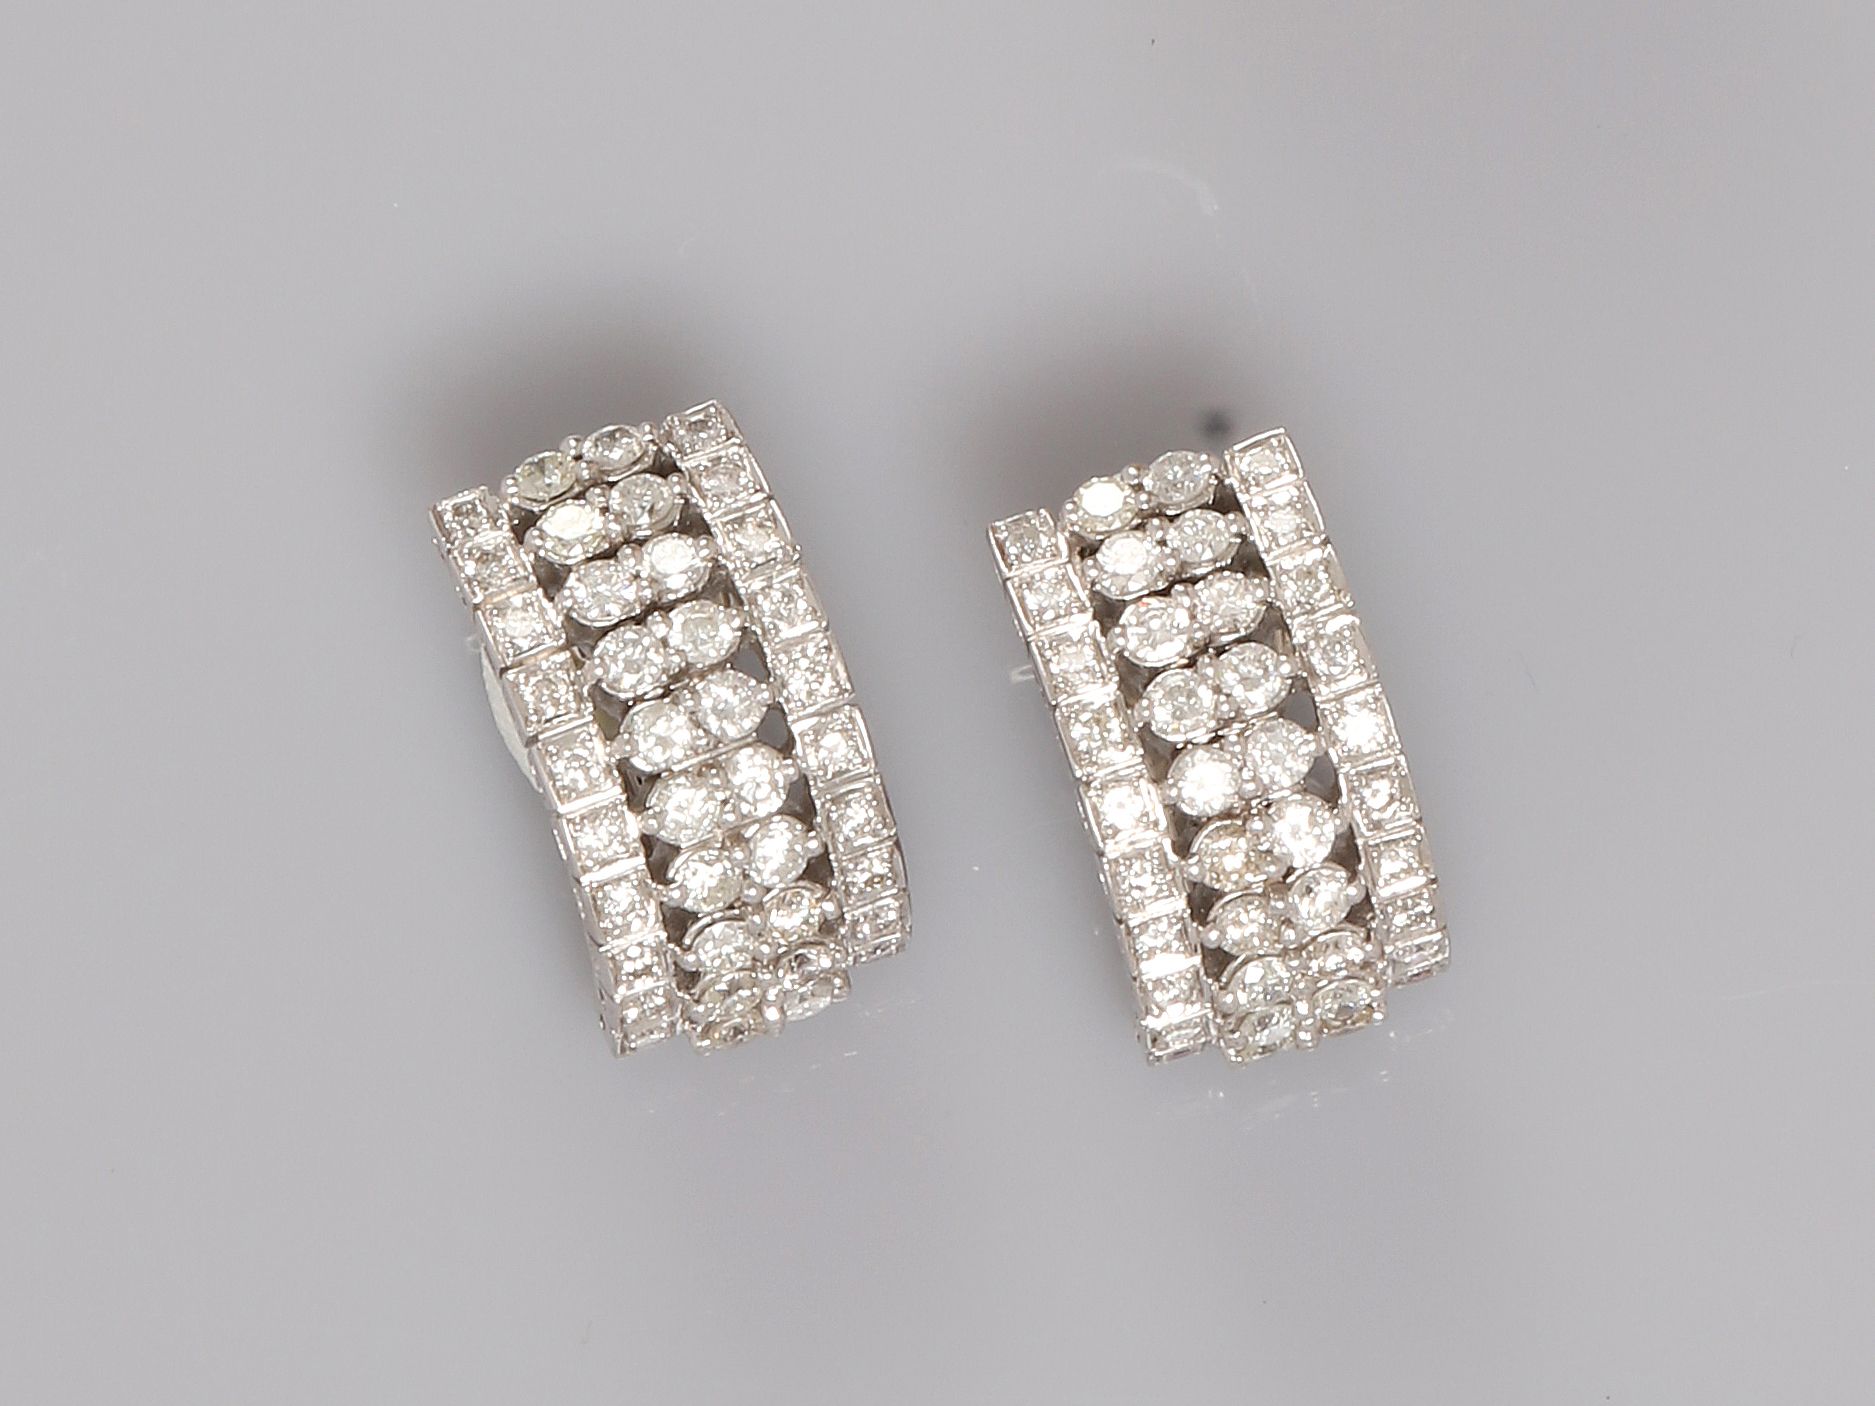 Null Earrings in white gold, 750 MM, covered with diamonds, total 4 carats, leng&hellip;